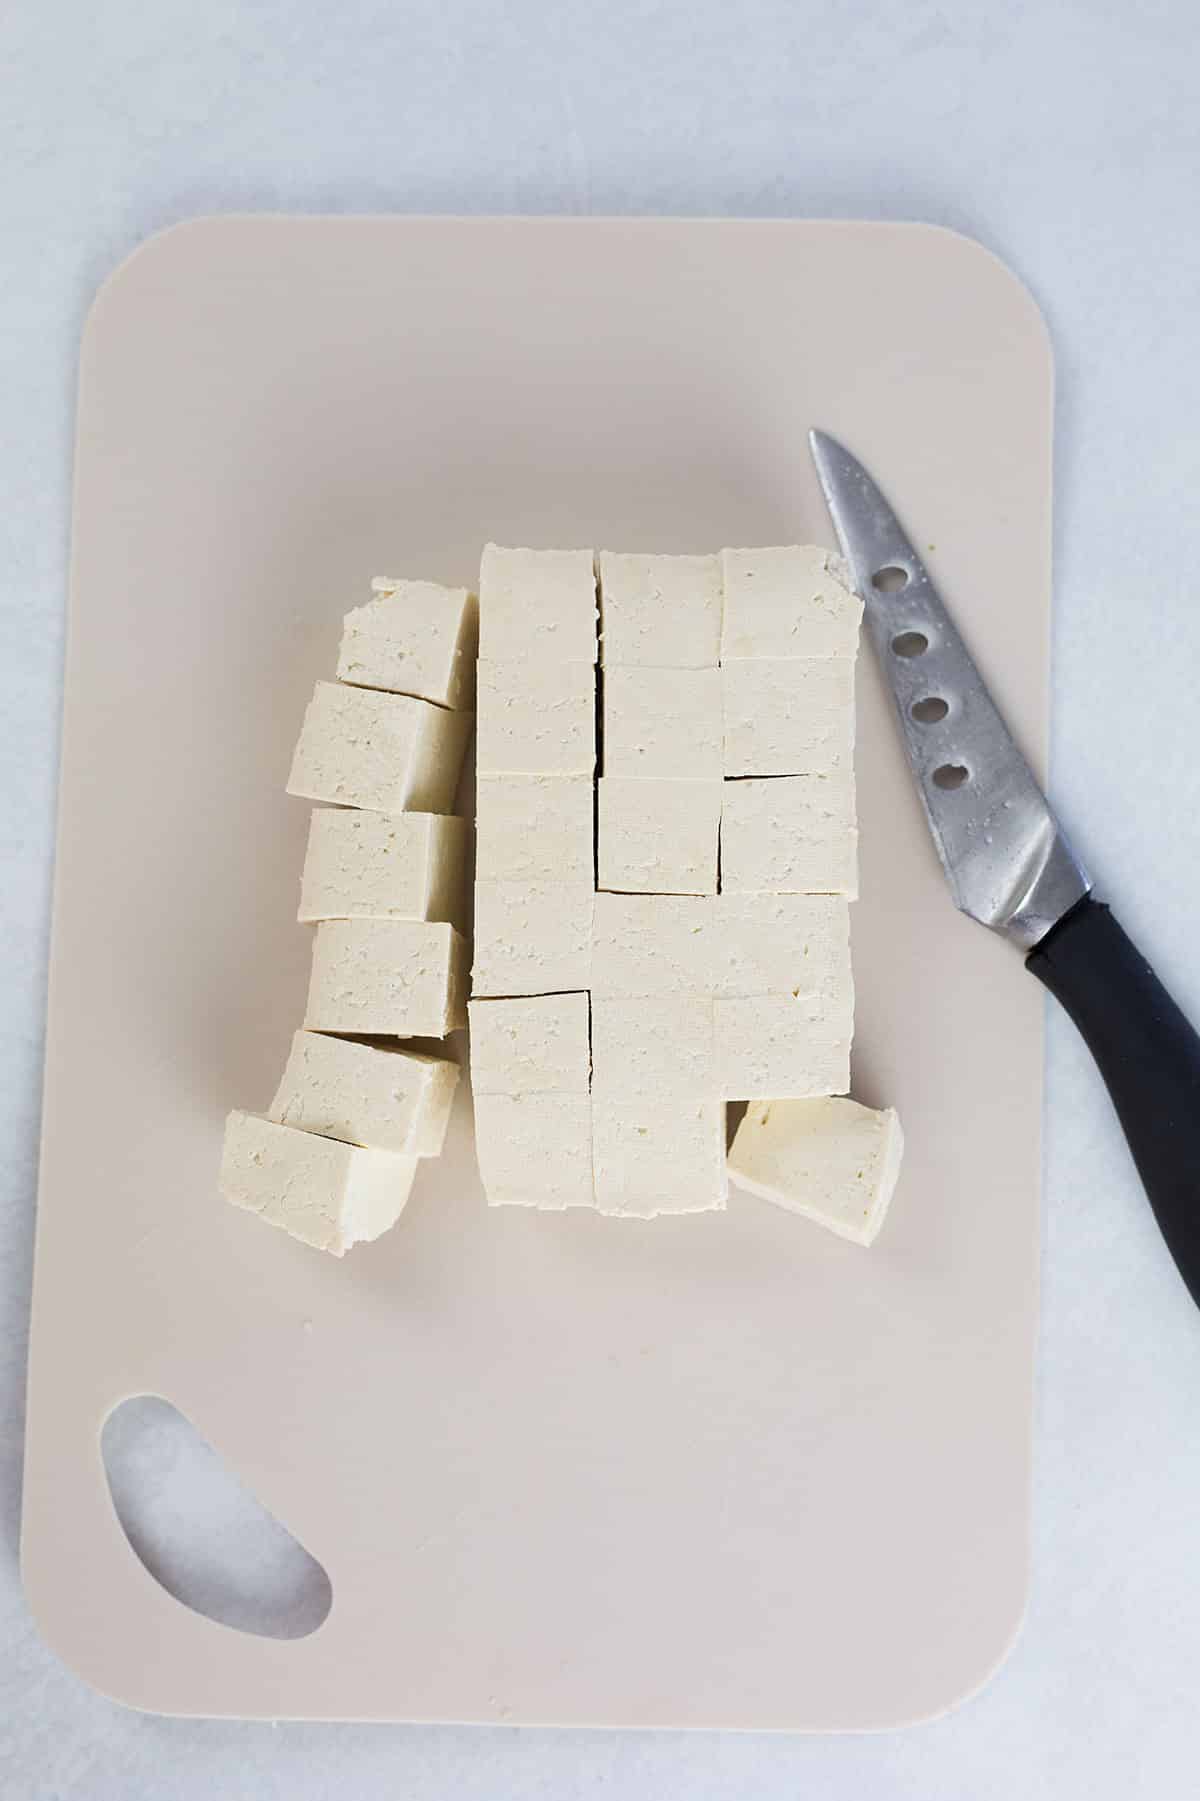 Tofu sliced on board with knife to the side.